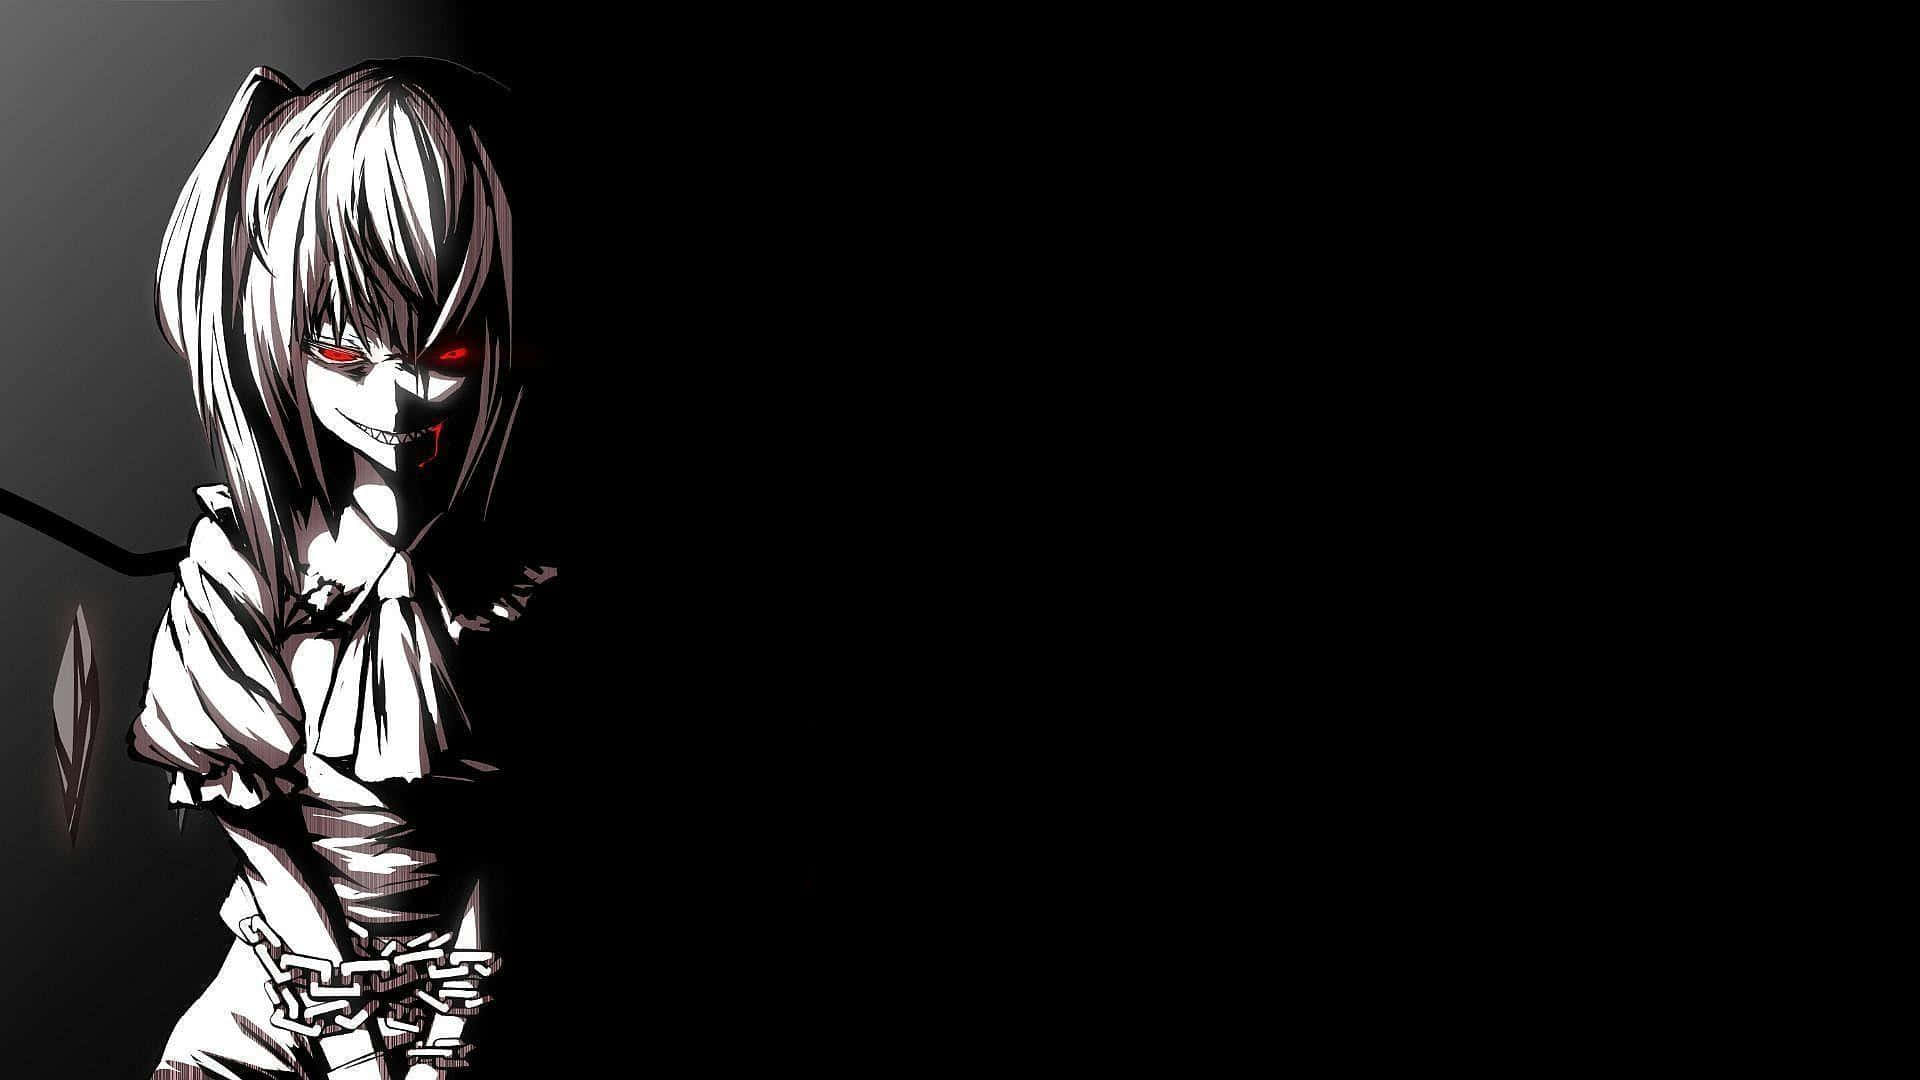 Chained Black Anime Girl Aesthetic Pc Background